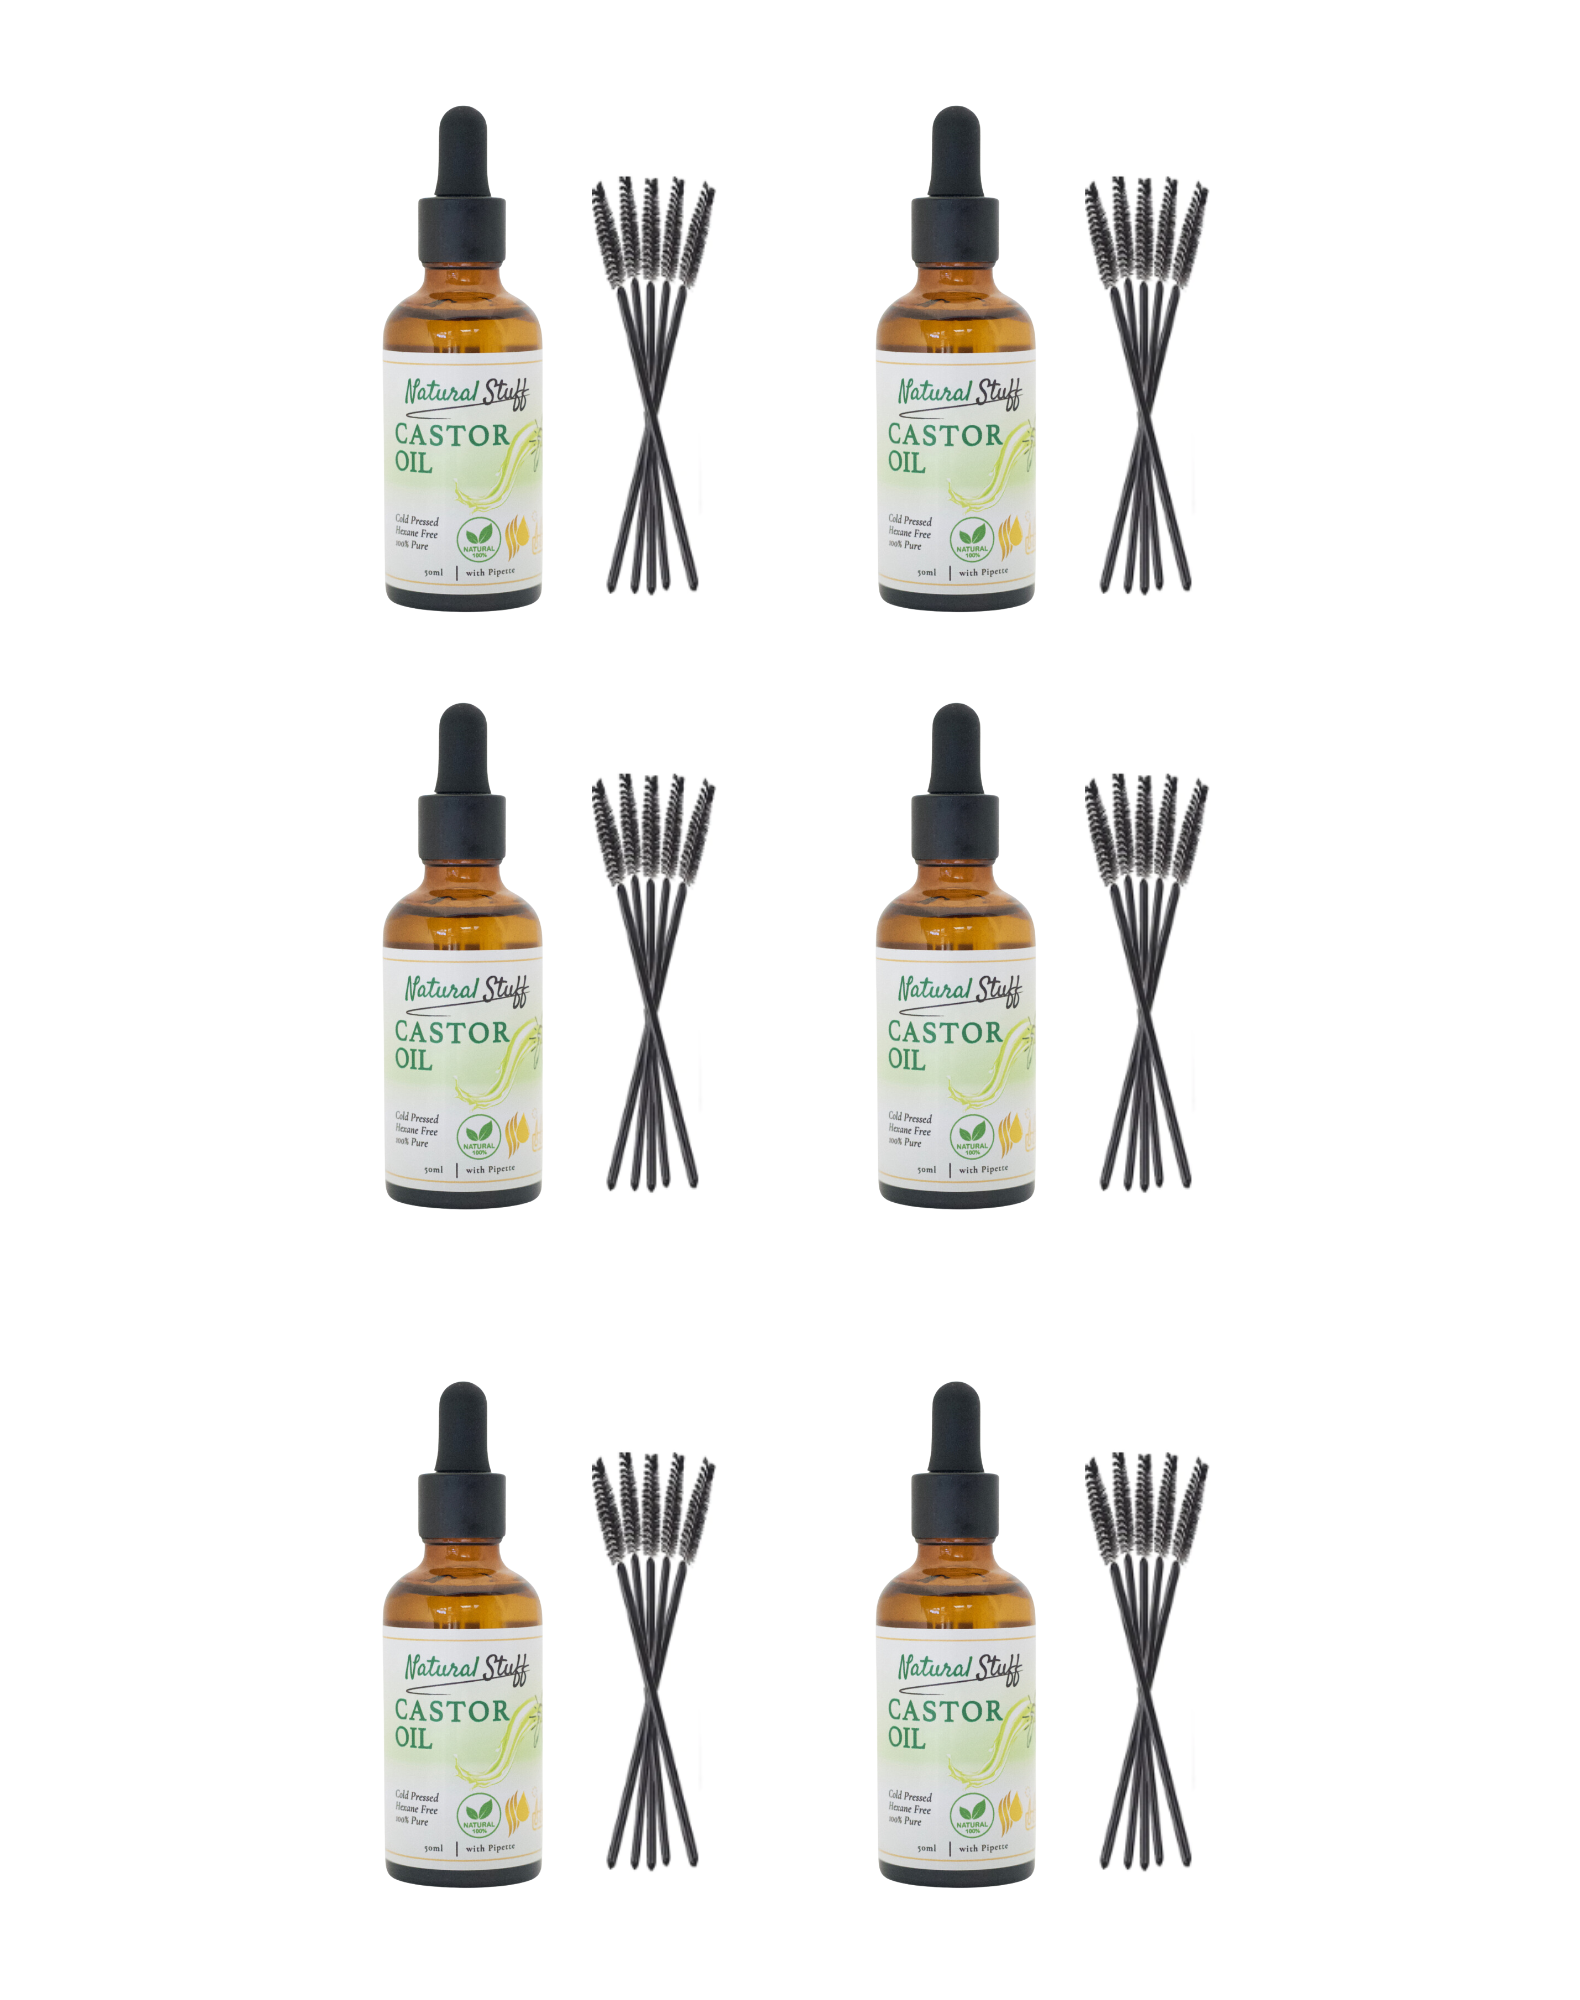 Natural Stuff Premium Castor Oil Cold-pressed Hexane Free 50ml with free 5 Mascara Wands